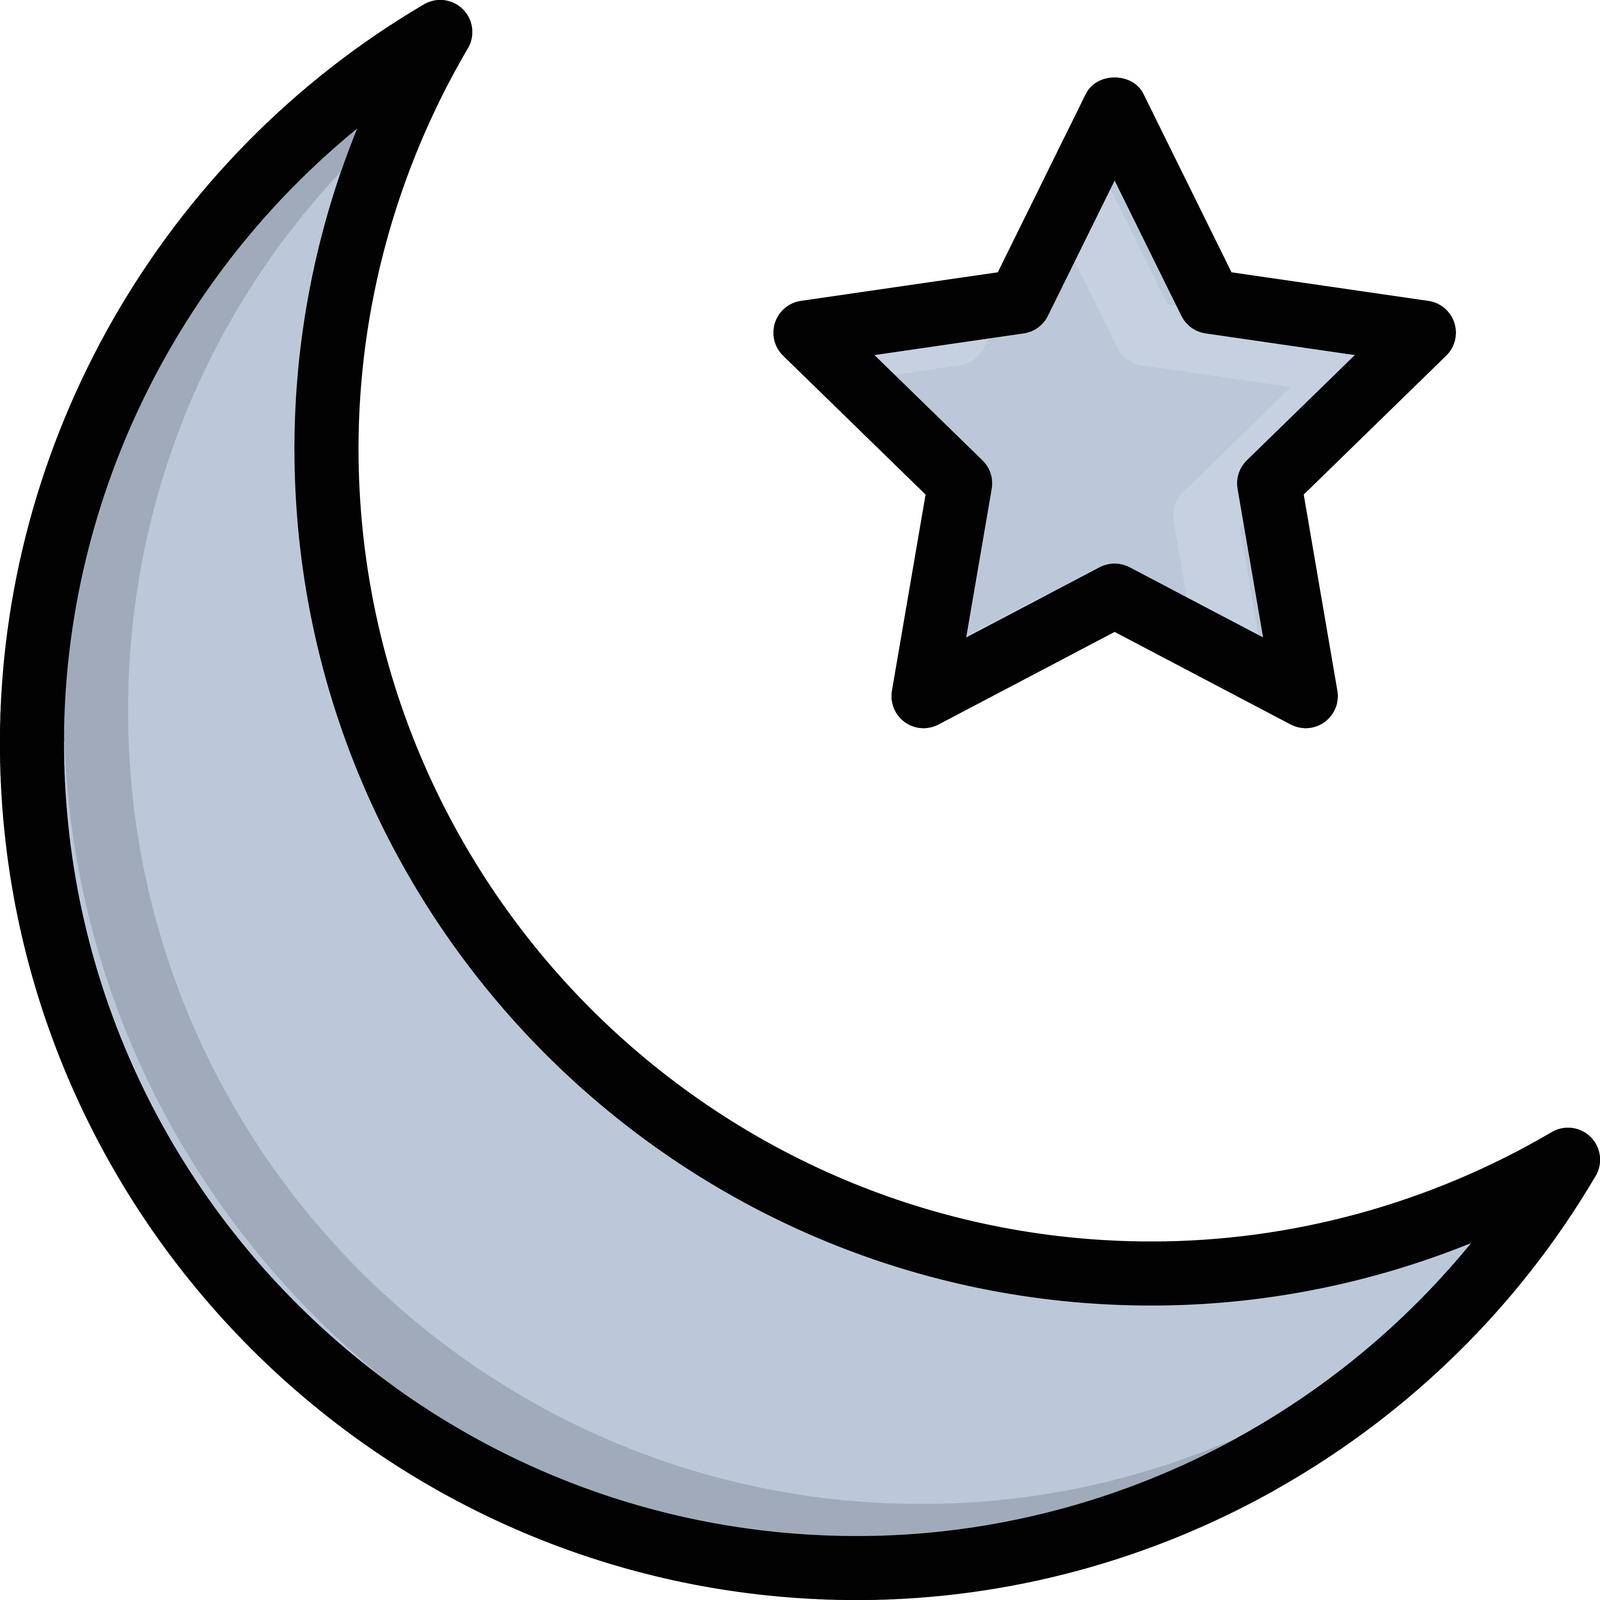 moon Vector illustration on a transparent background. Premium quality symbols. Glyphs vector icon for concept and graphic design.